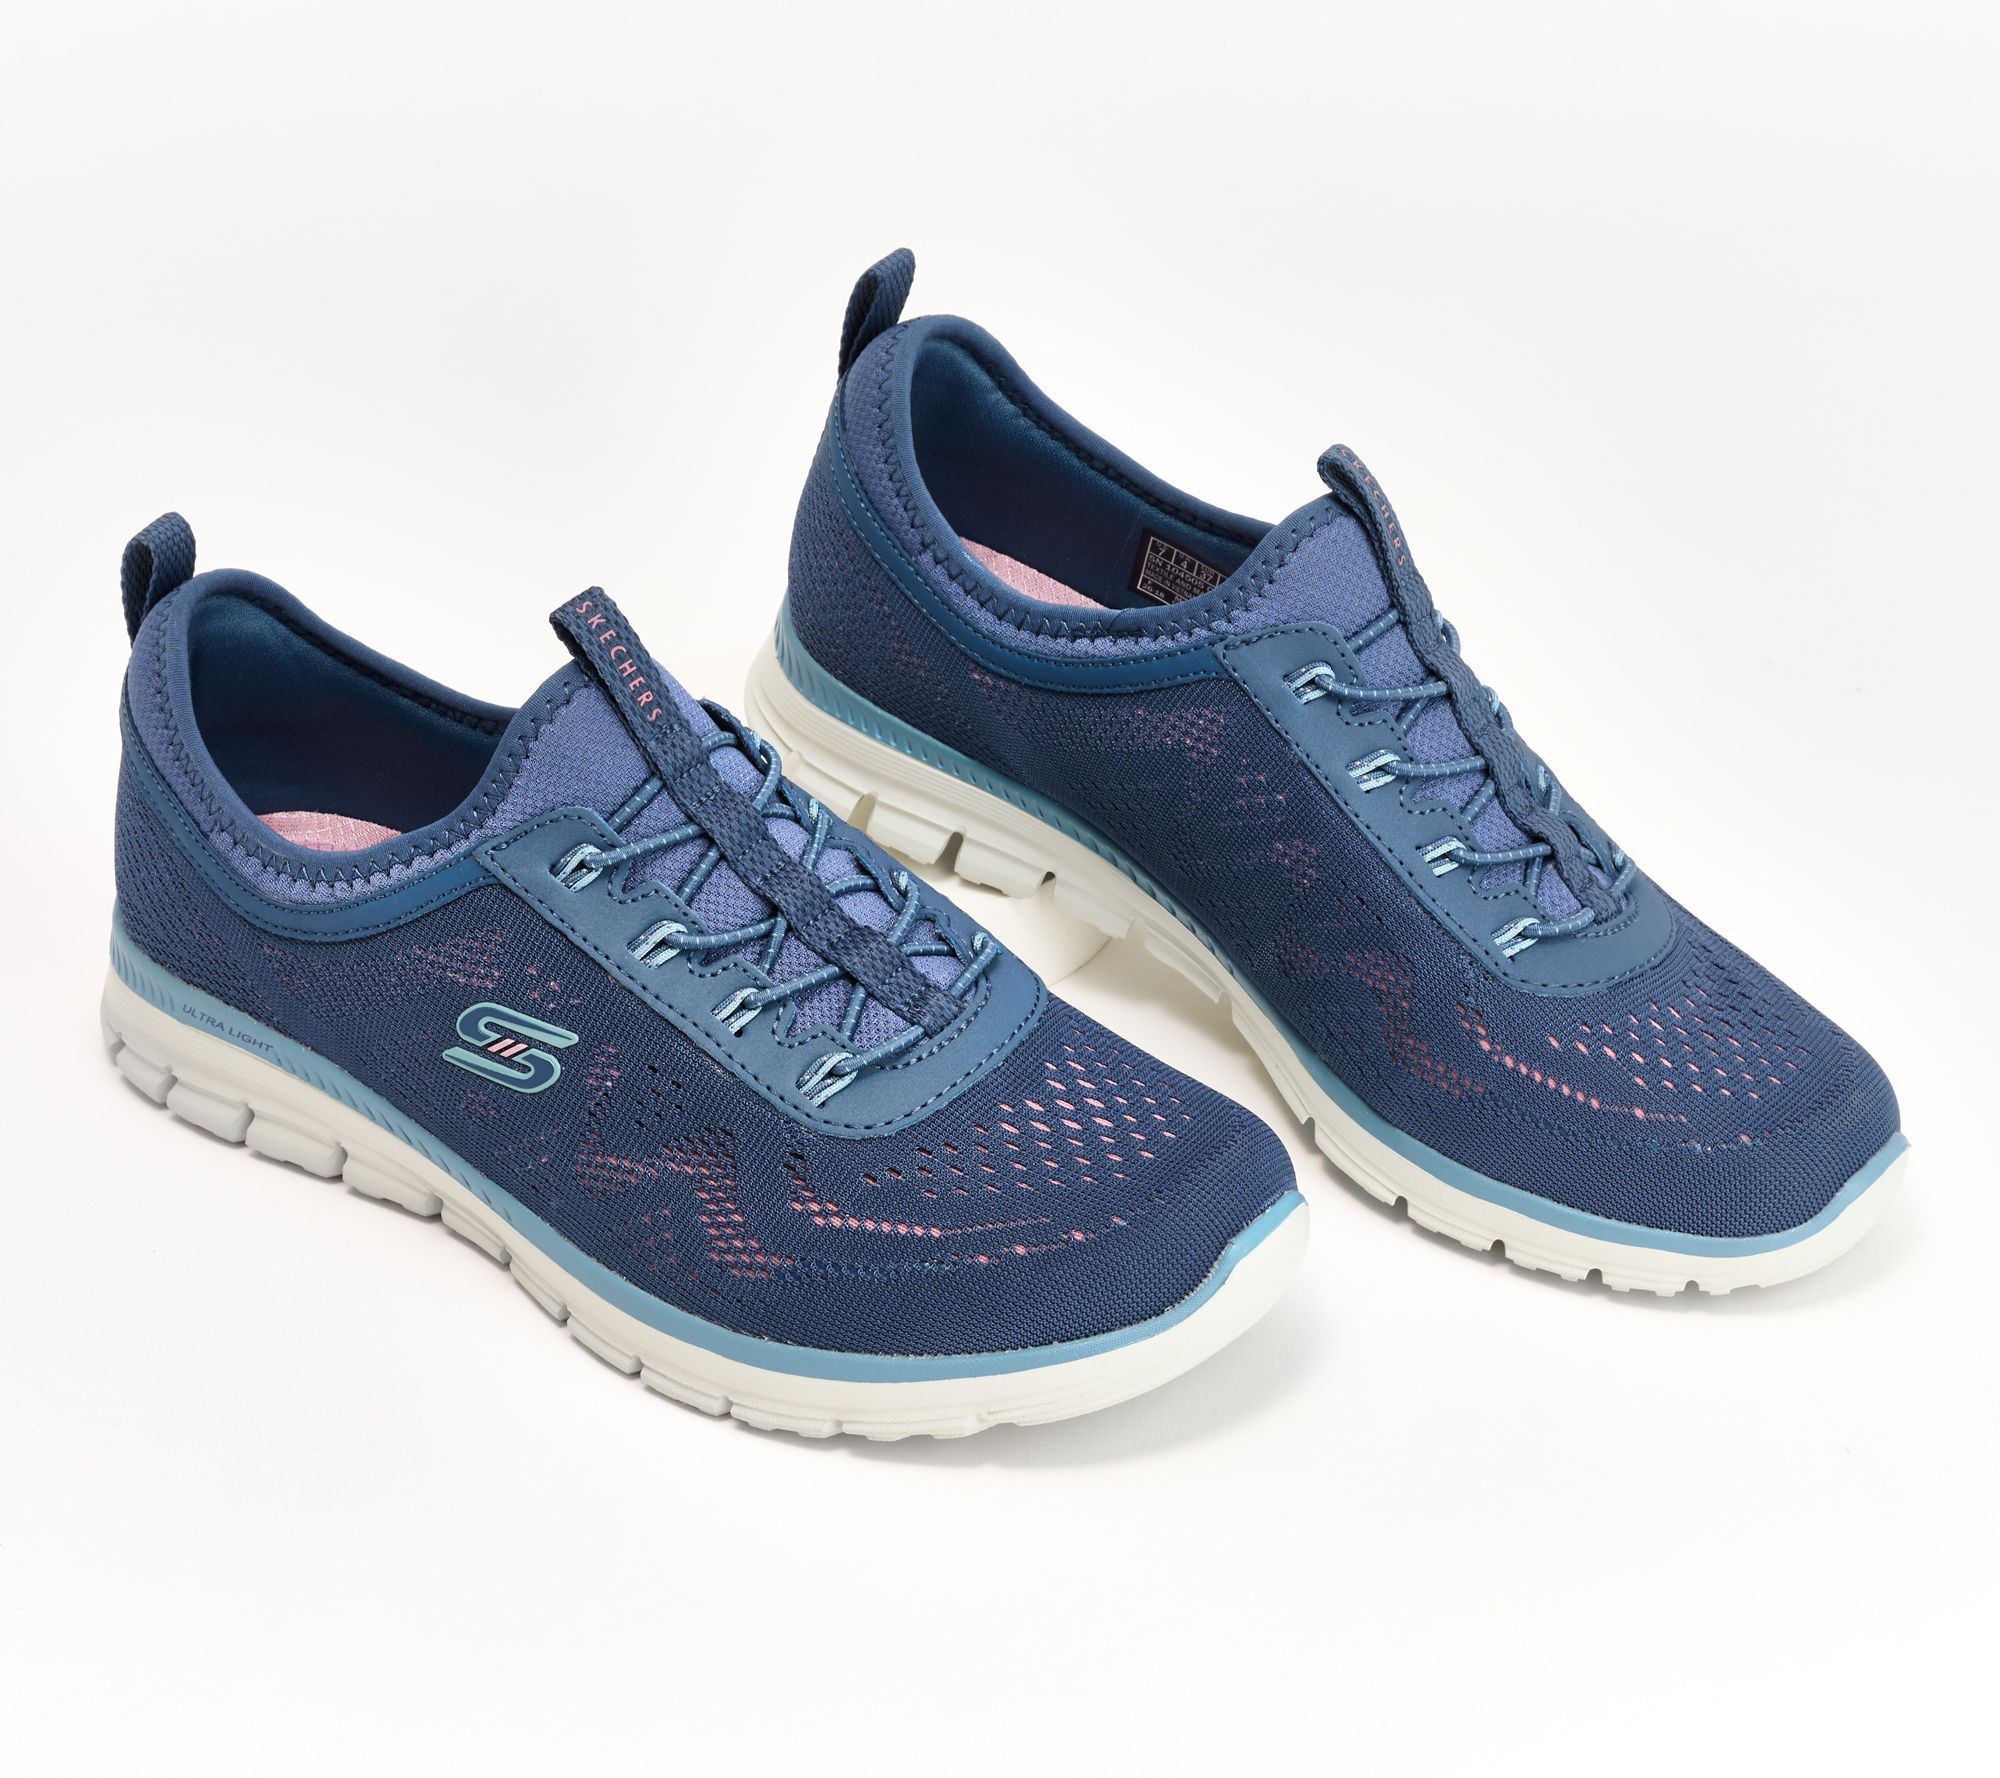 Women's Skechers Shoes  Sneakers & Sandals Collection 